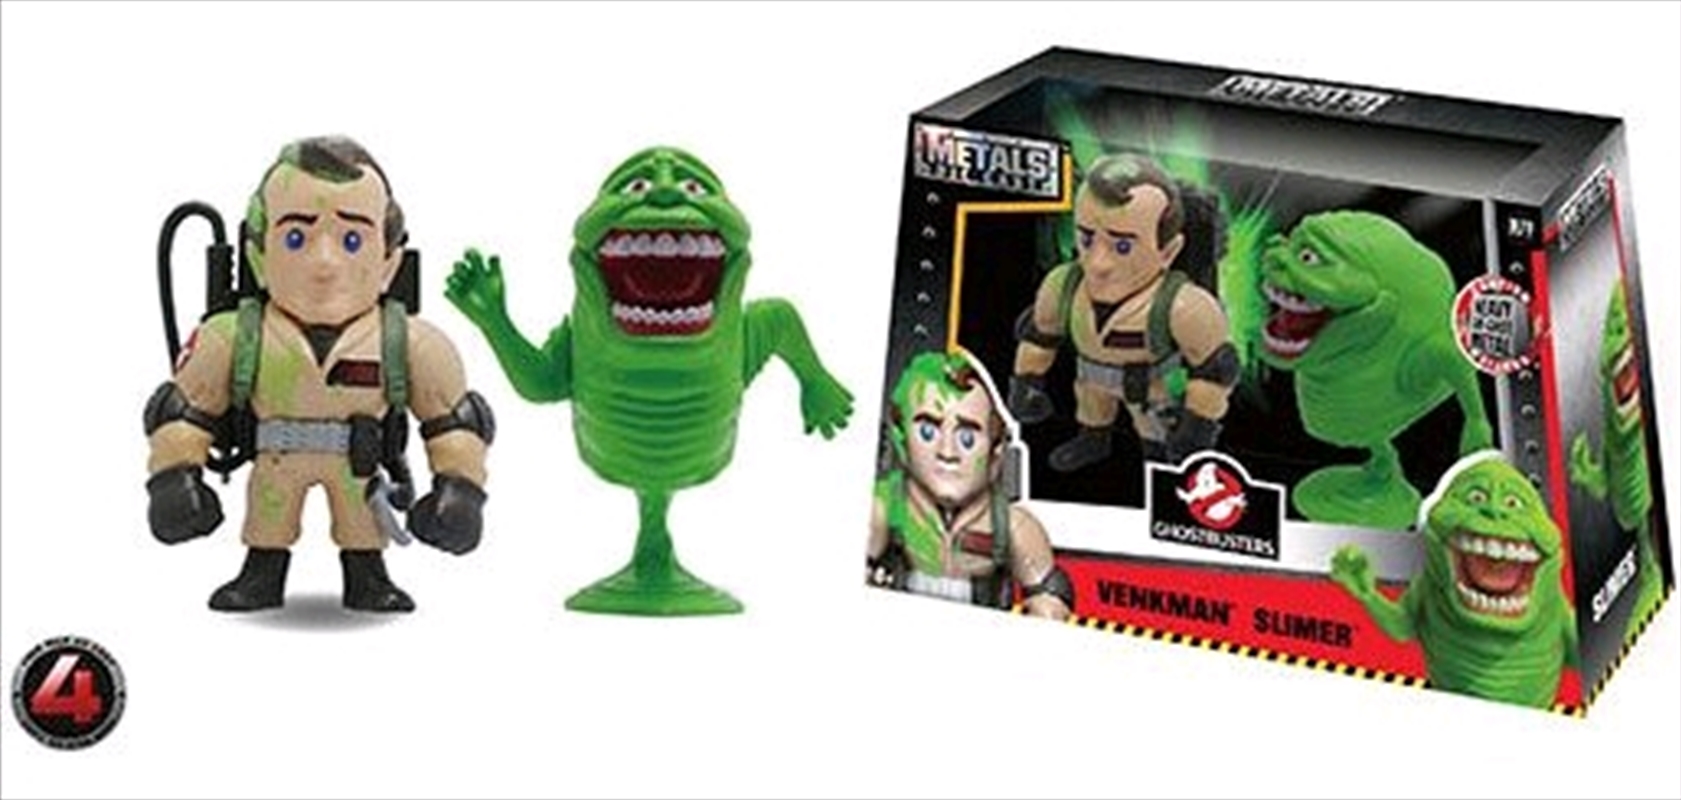 Ghostbusters - Venkman And Slimer 4" Metals - 2 Pack Wave 1/Product Detail/Figurines